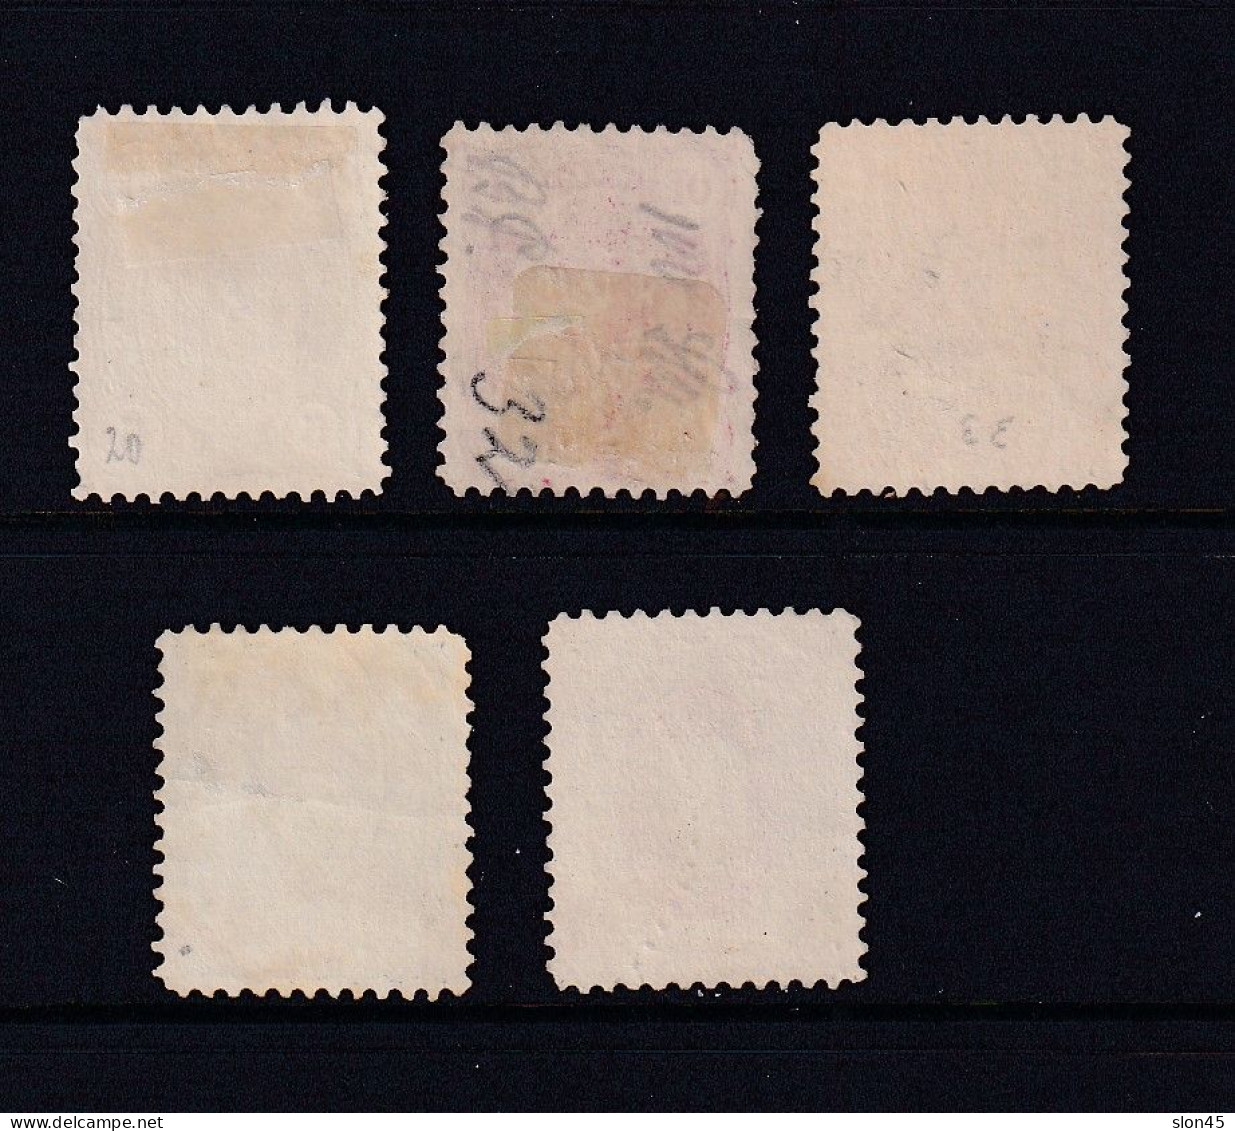 Finland Suomi 1885 5p-1m Sc 31-35 CV $41 Used 15872 - Used Stamps